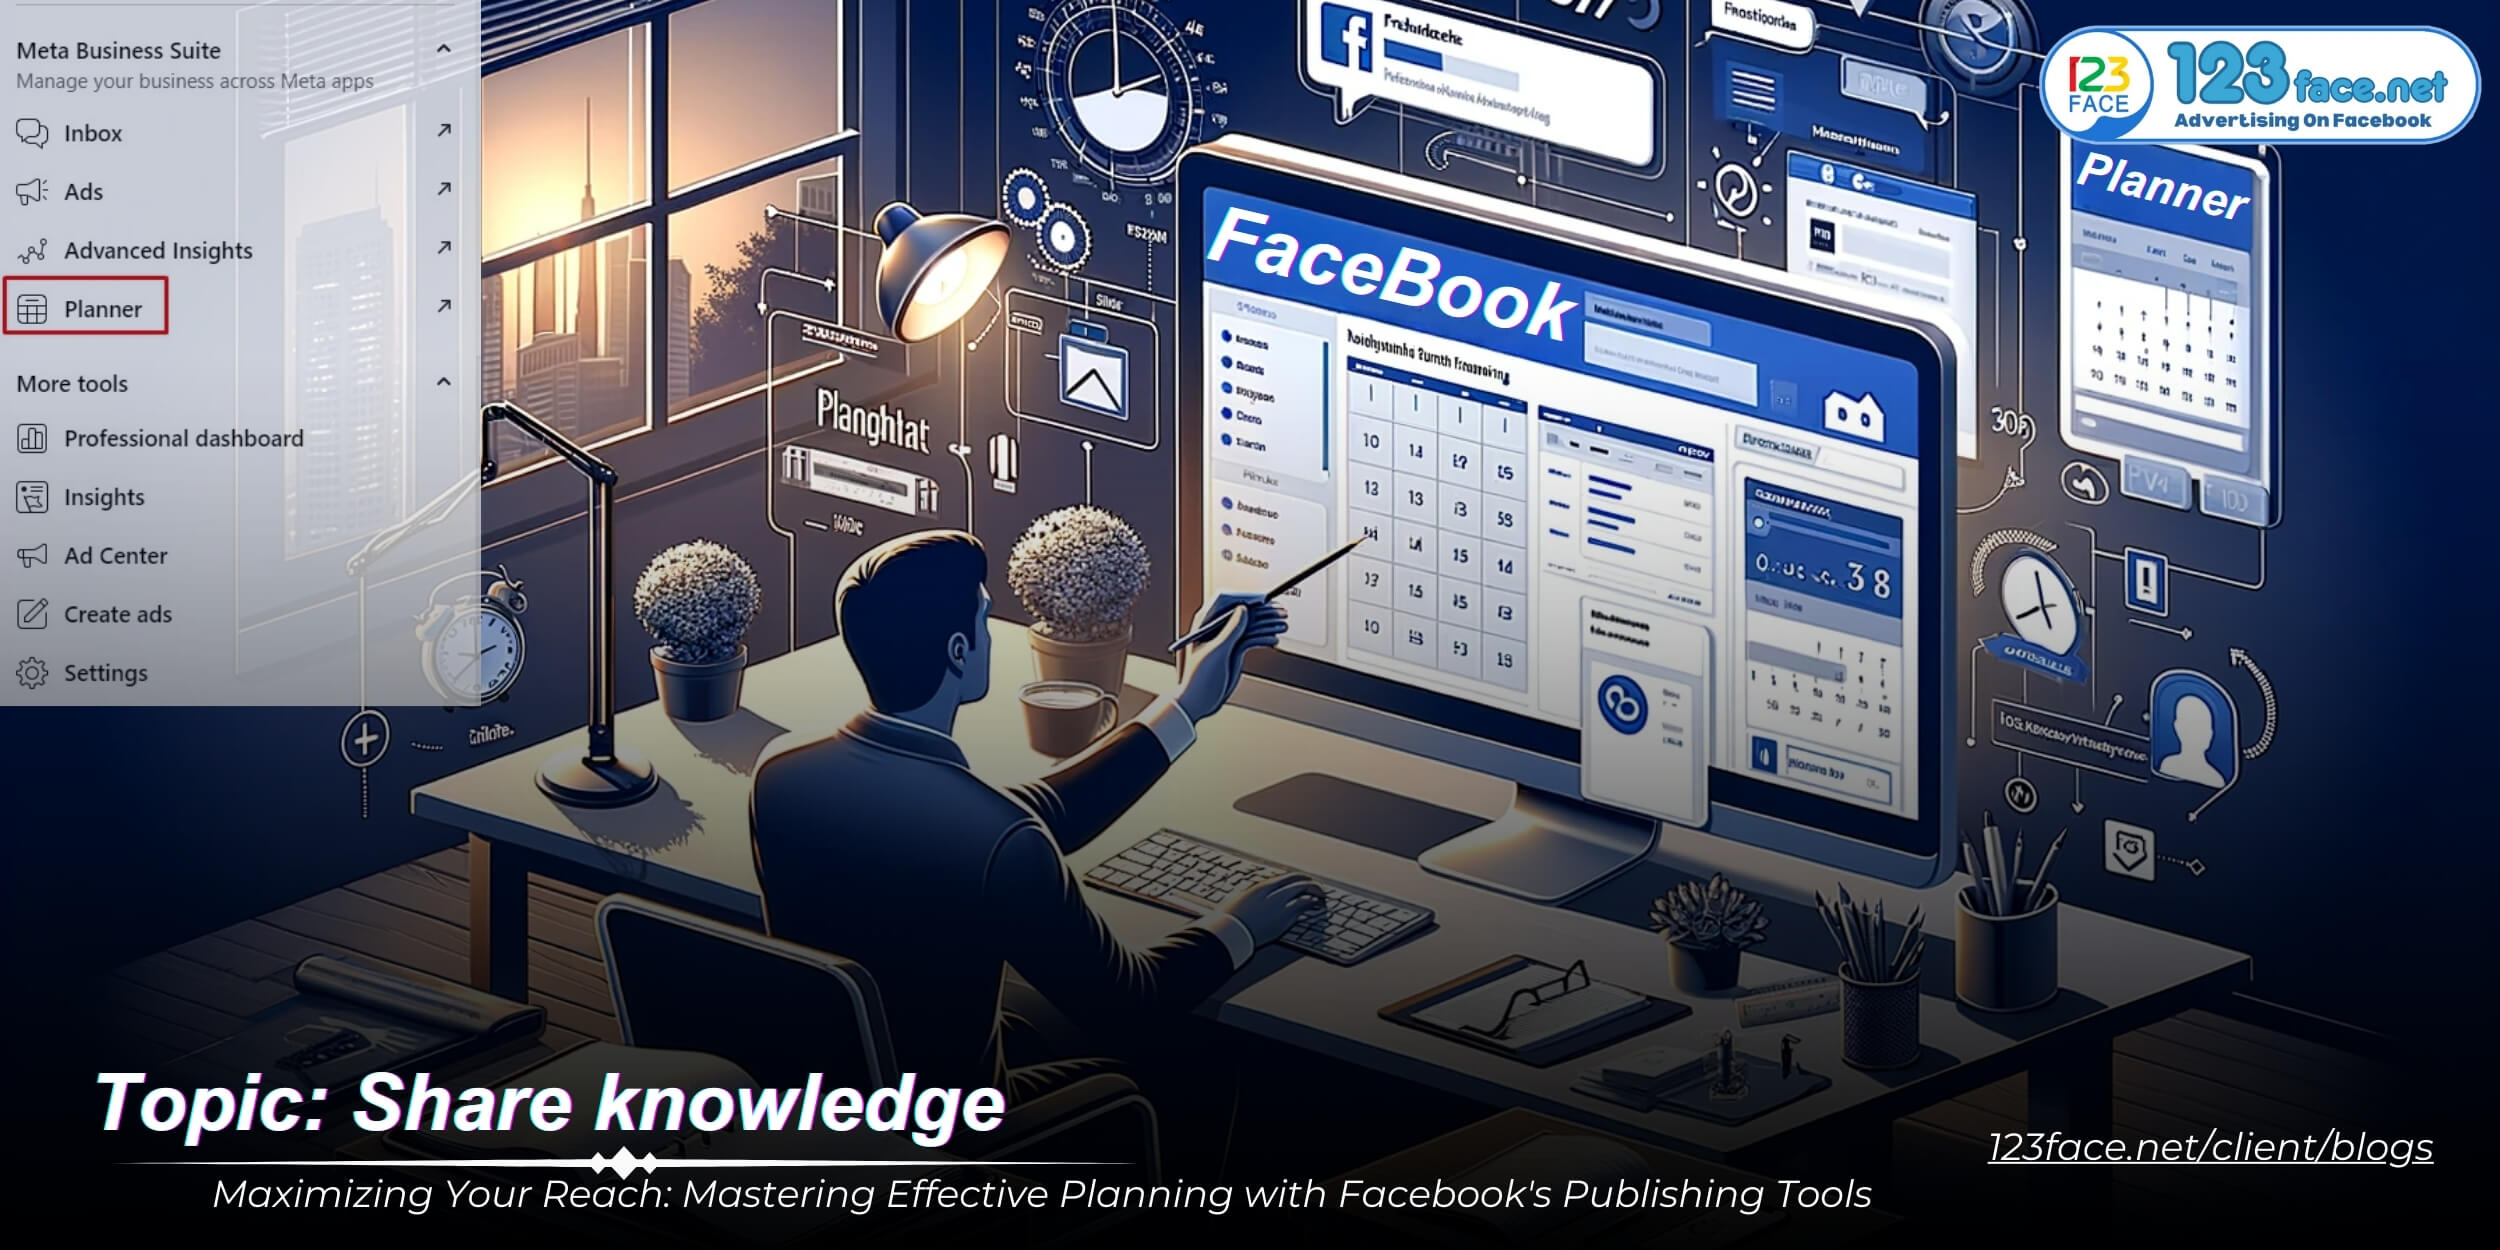 Maximizing Your Reach: Mastering Effective Planning with Facebook Publishing Tools